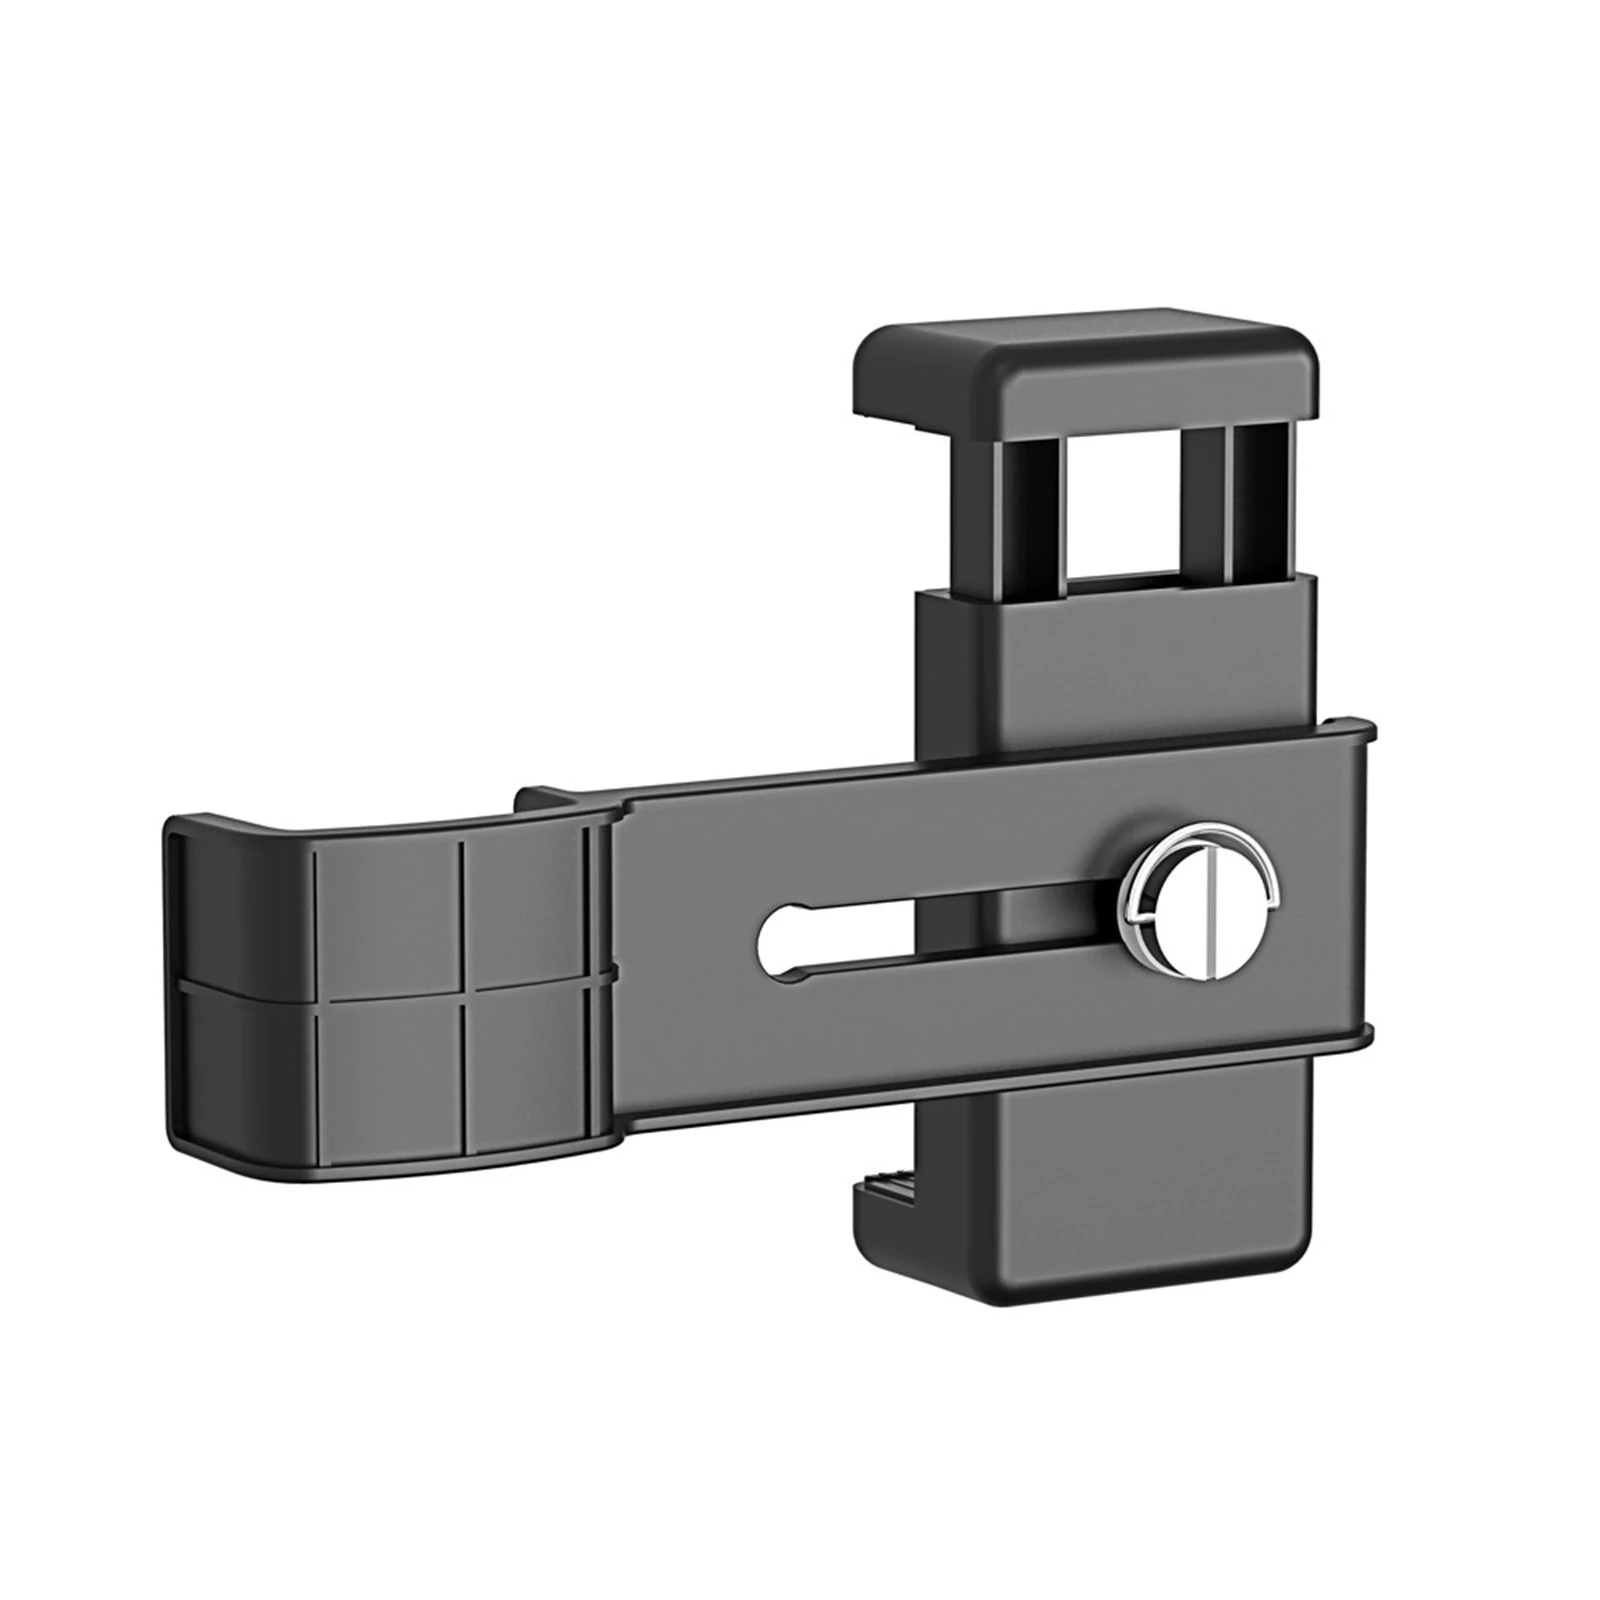 

Smart Phone Mount Bracket For DJI Osmo Pocket 2 Handheld Gimbal Stabilizer Phone Connector Adapter Fixing Clamp 1/4 Inch Holder